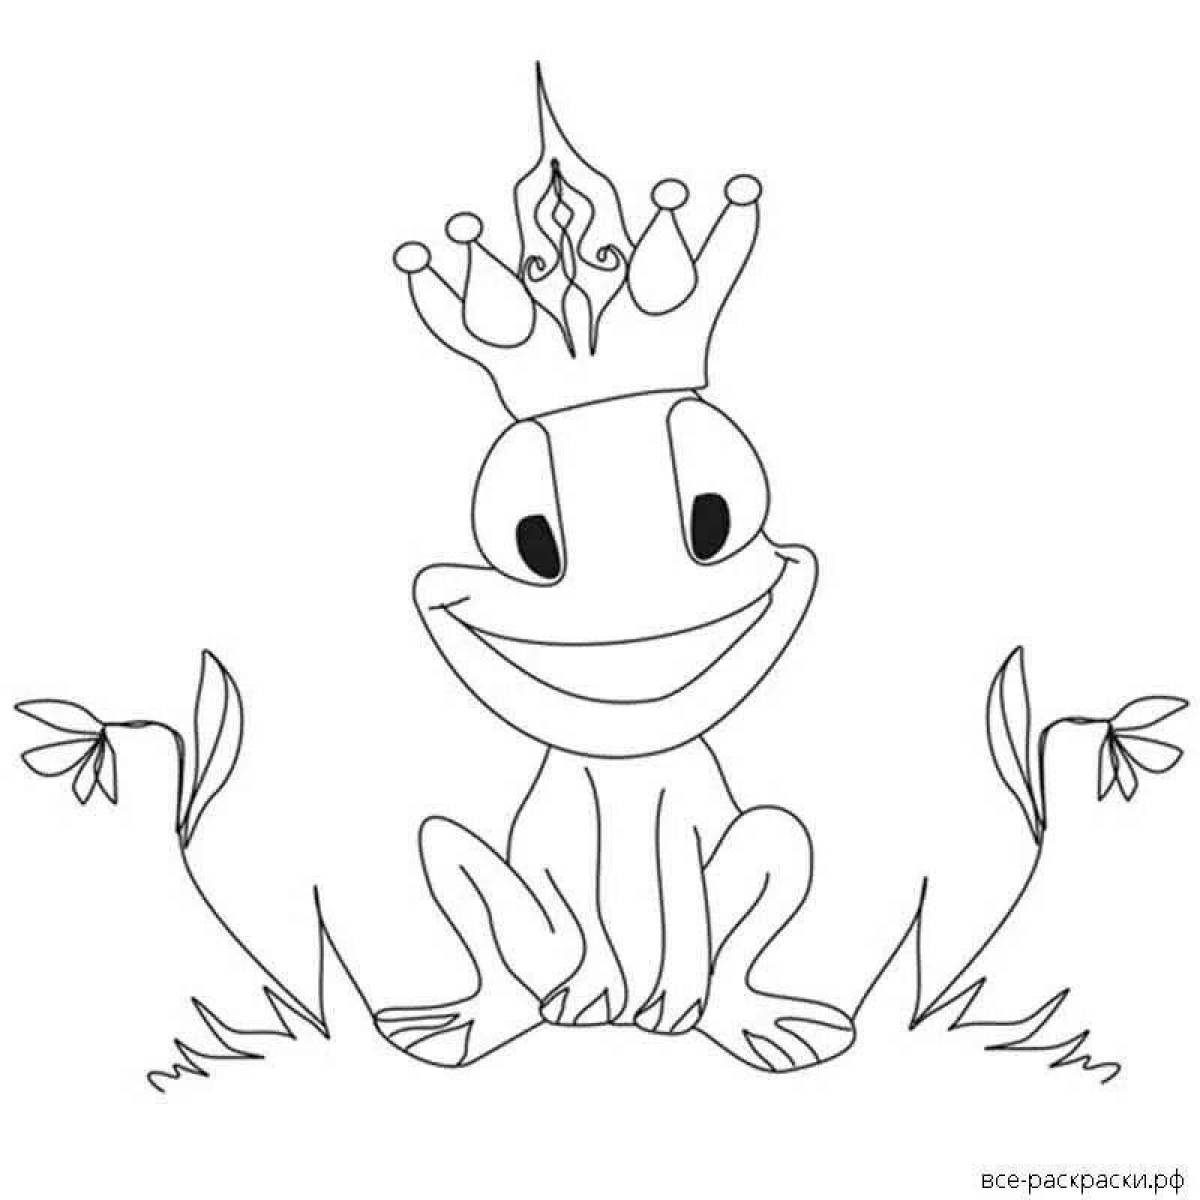 Inspirational Frog Princess Coloring Page for Kids